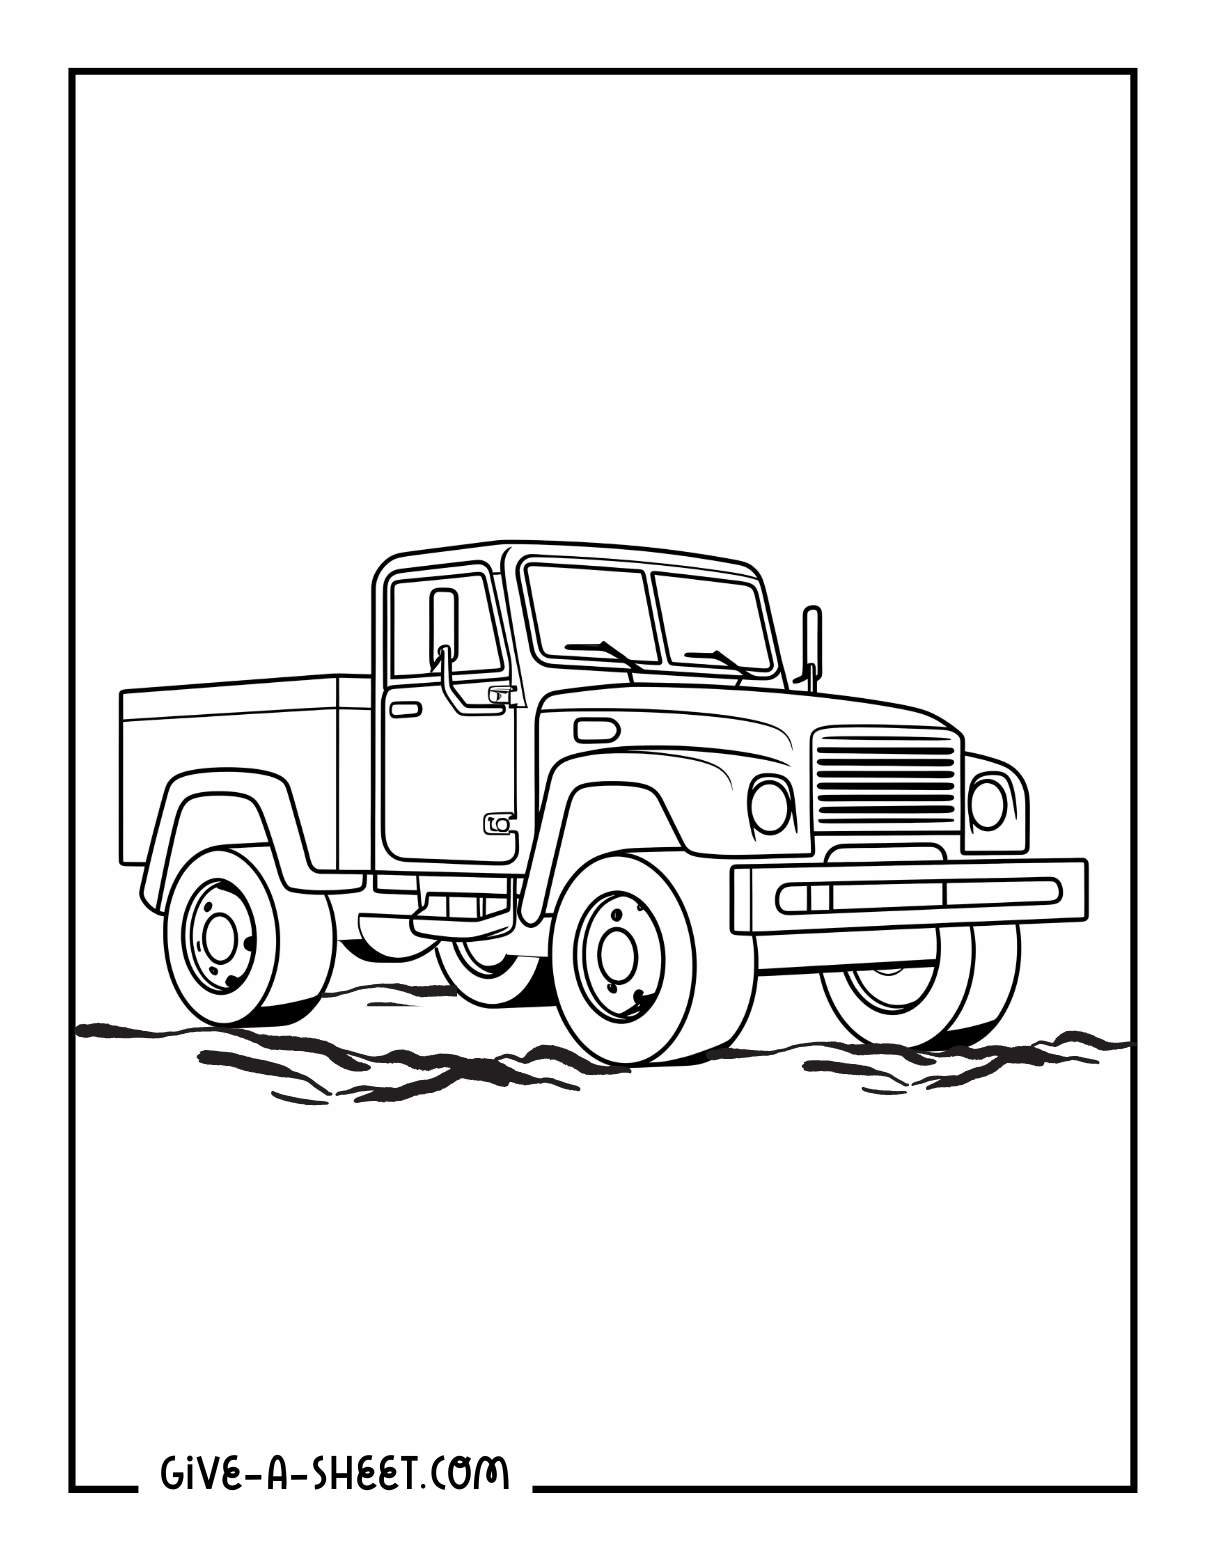 Simple truck coloring page off the road.